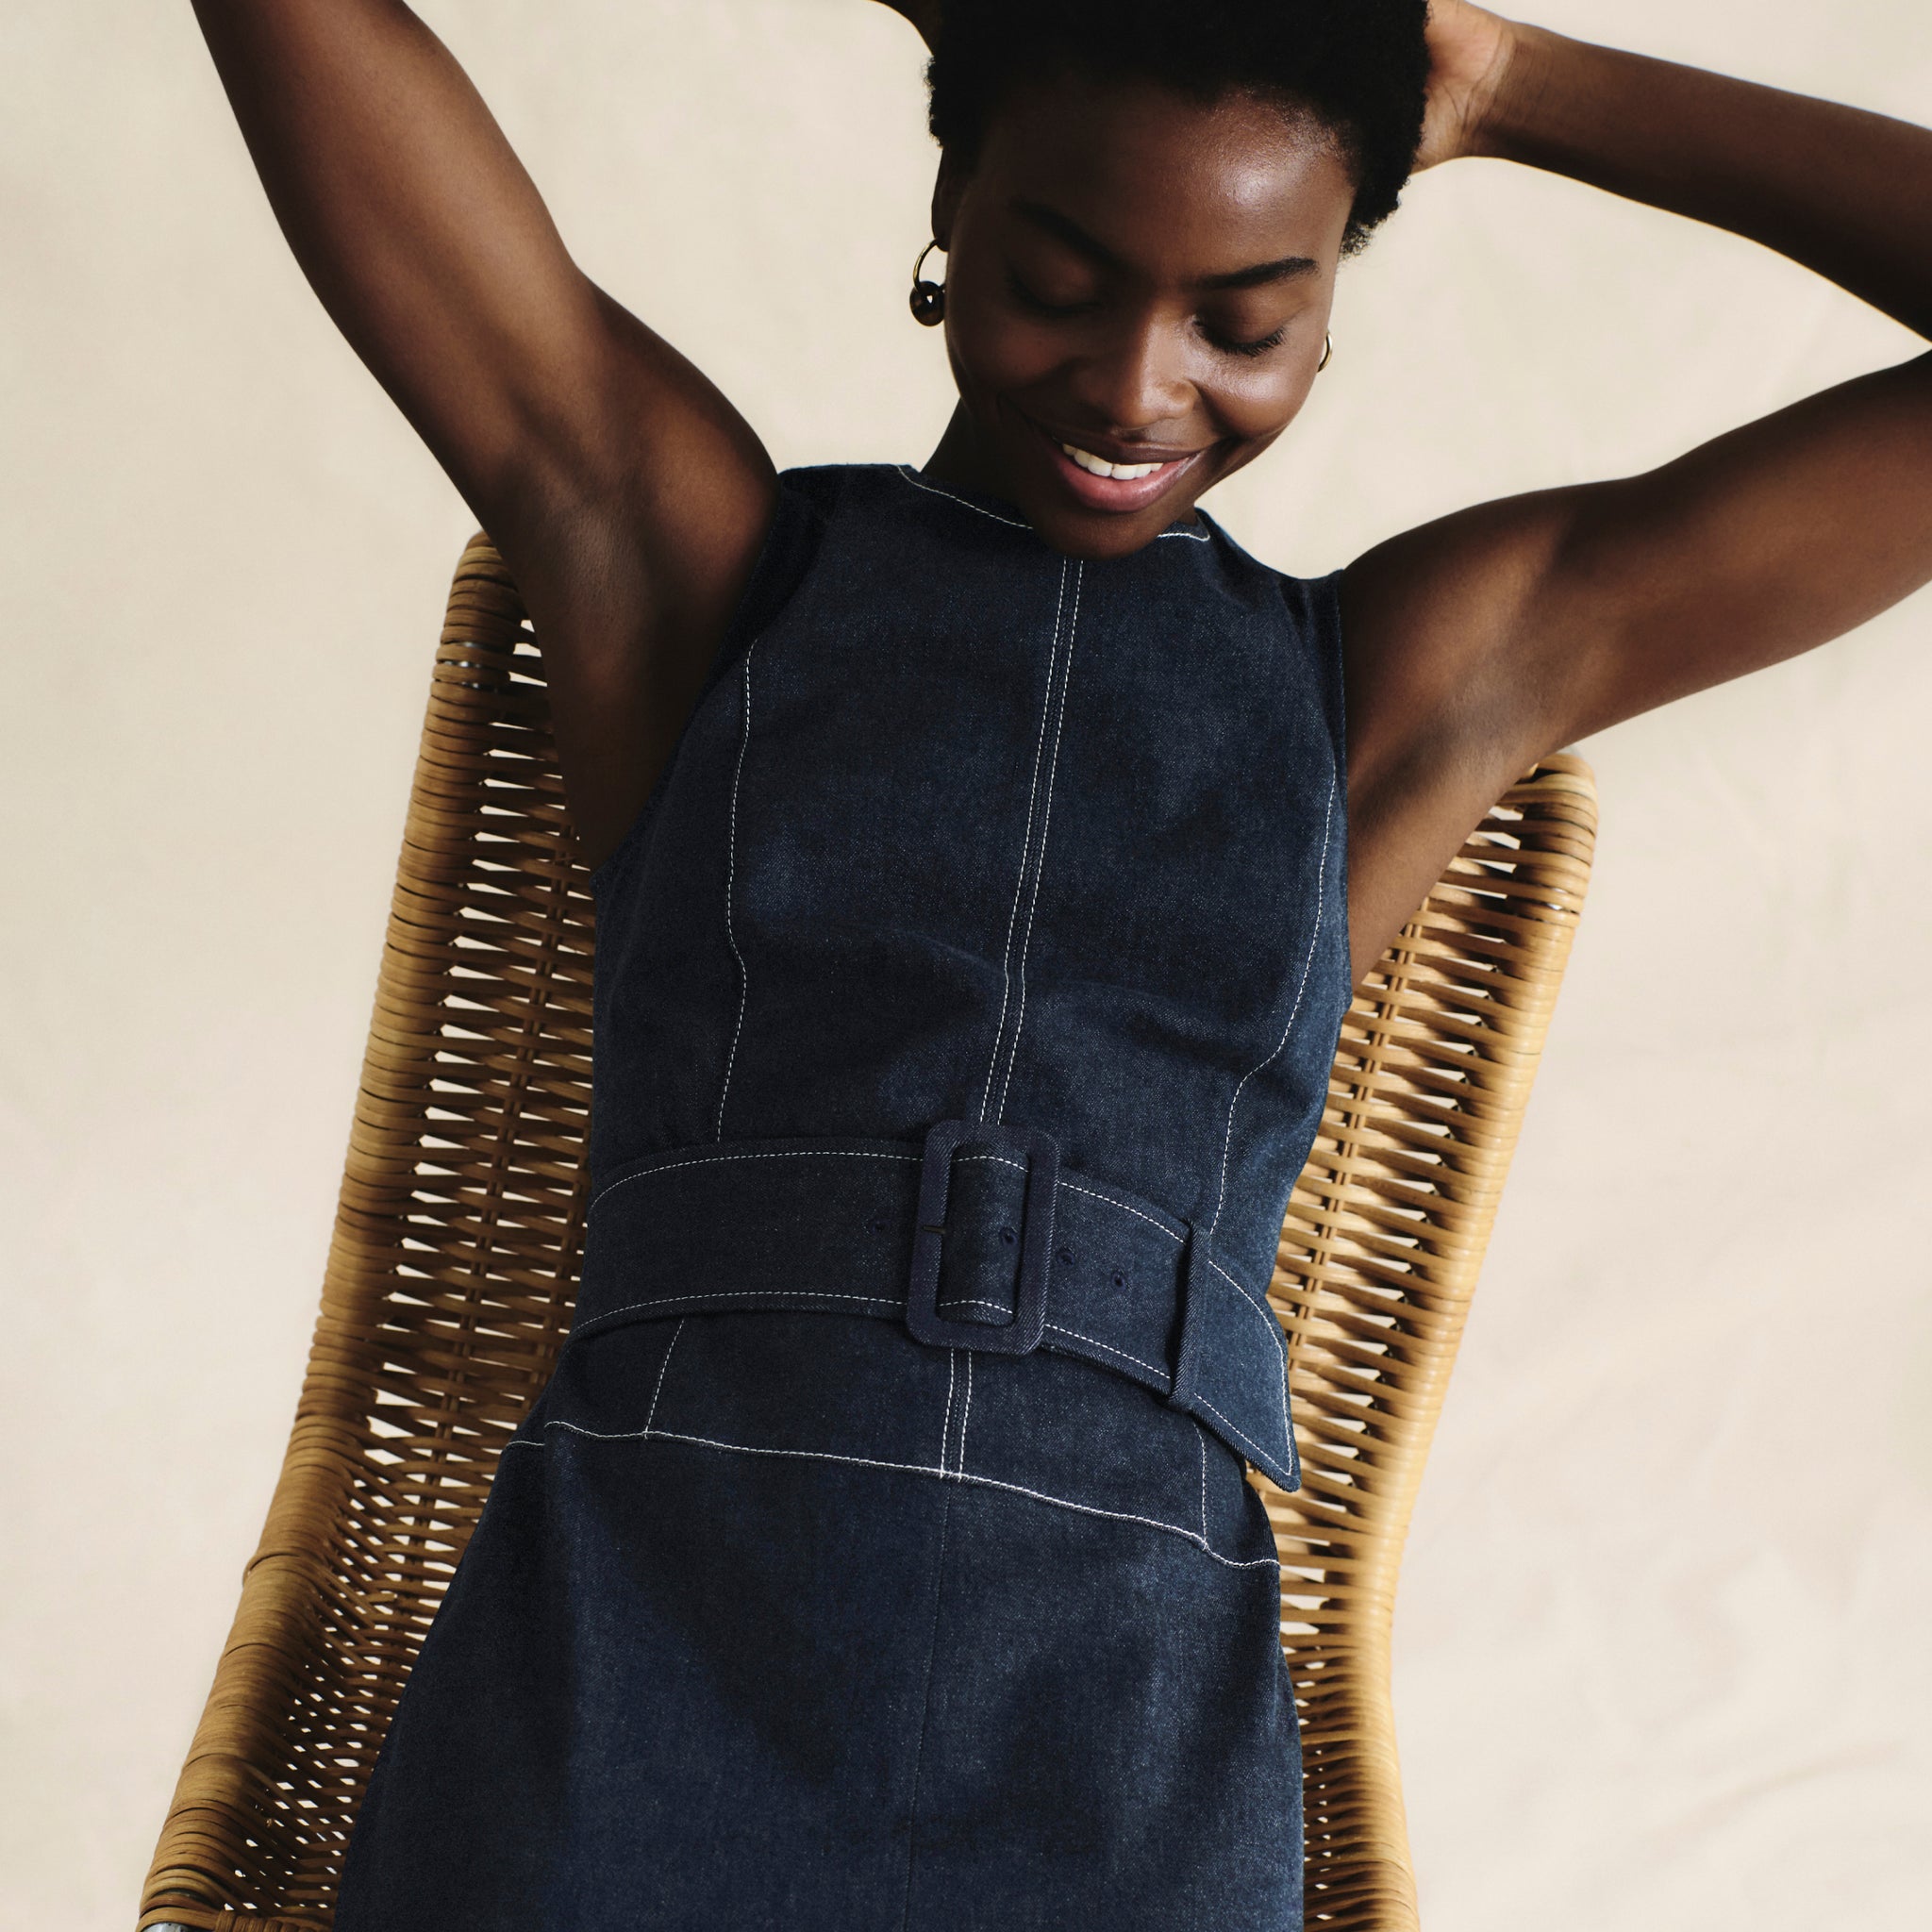 front image of a woman wearing the maude dress in dark wash